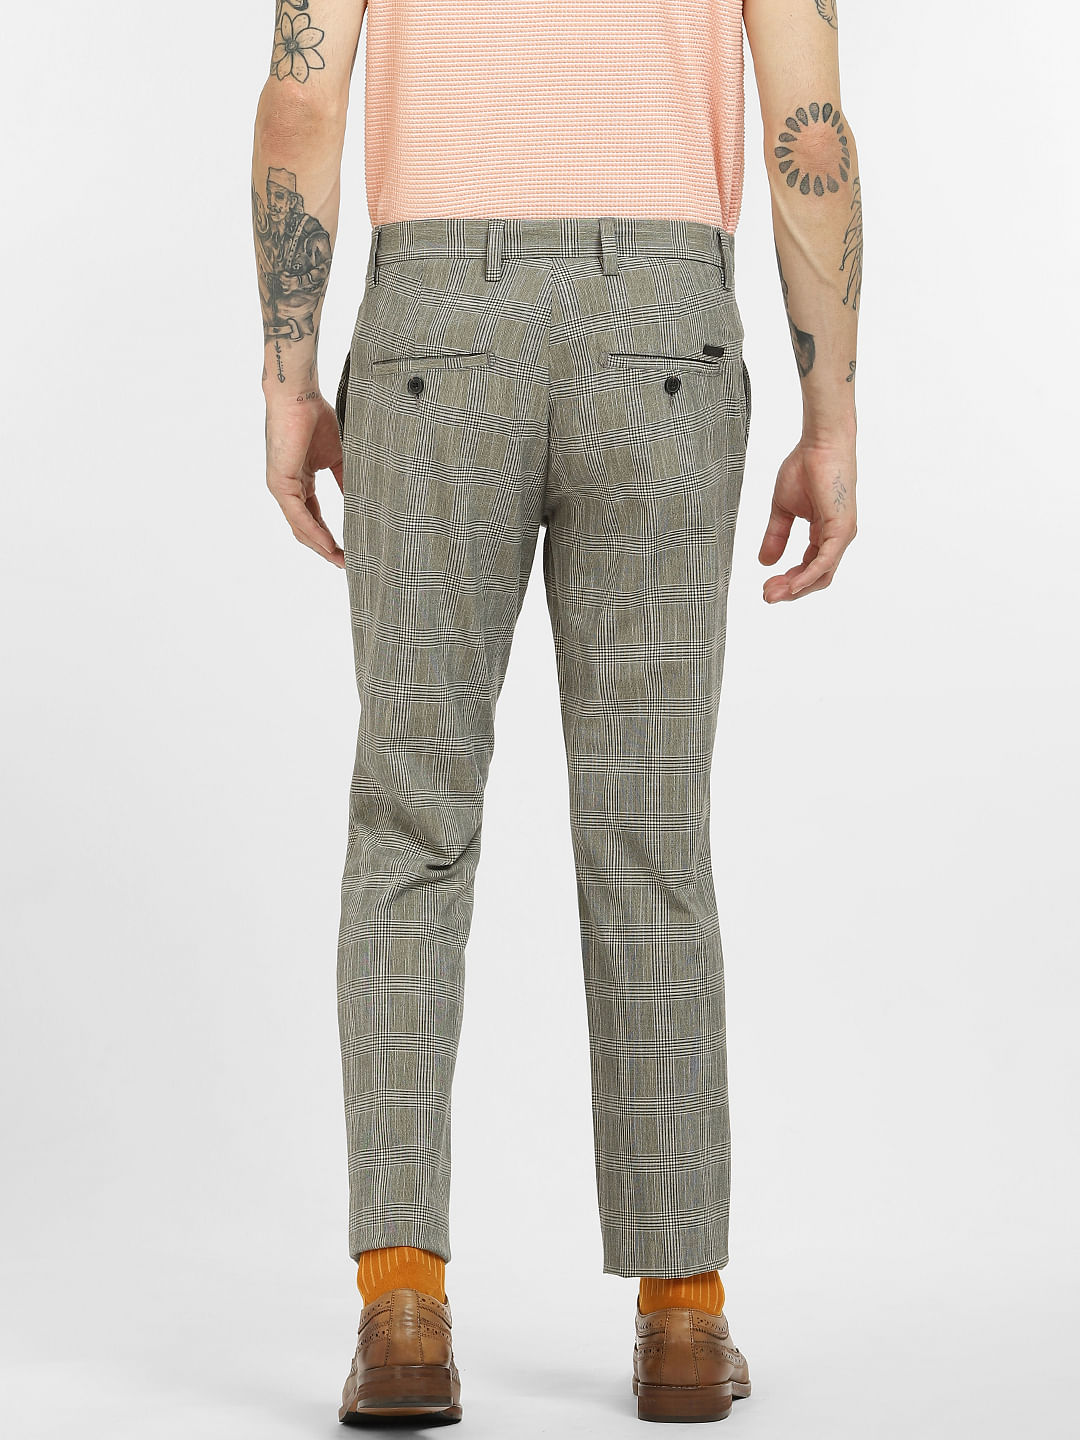 Shop Glen Plaid Pants for Men from latest collection at Forever 21  445375